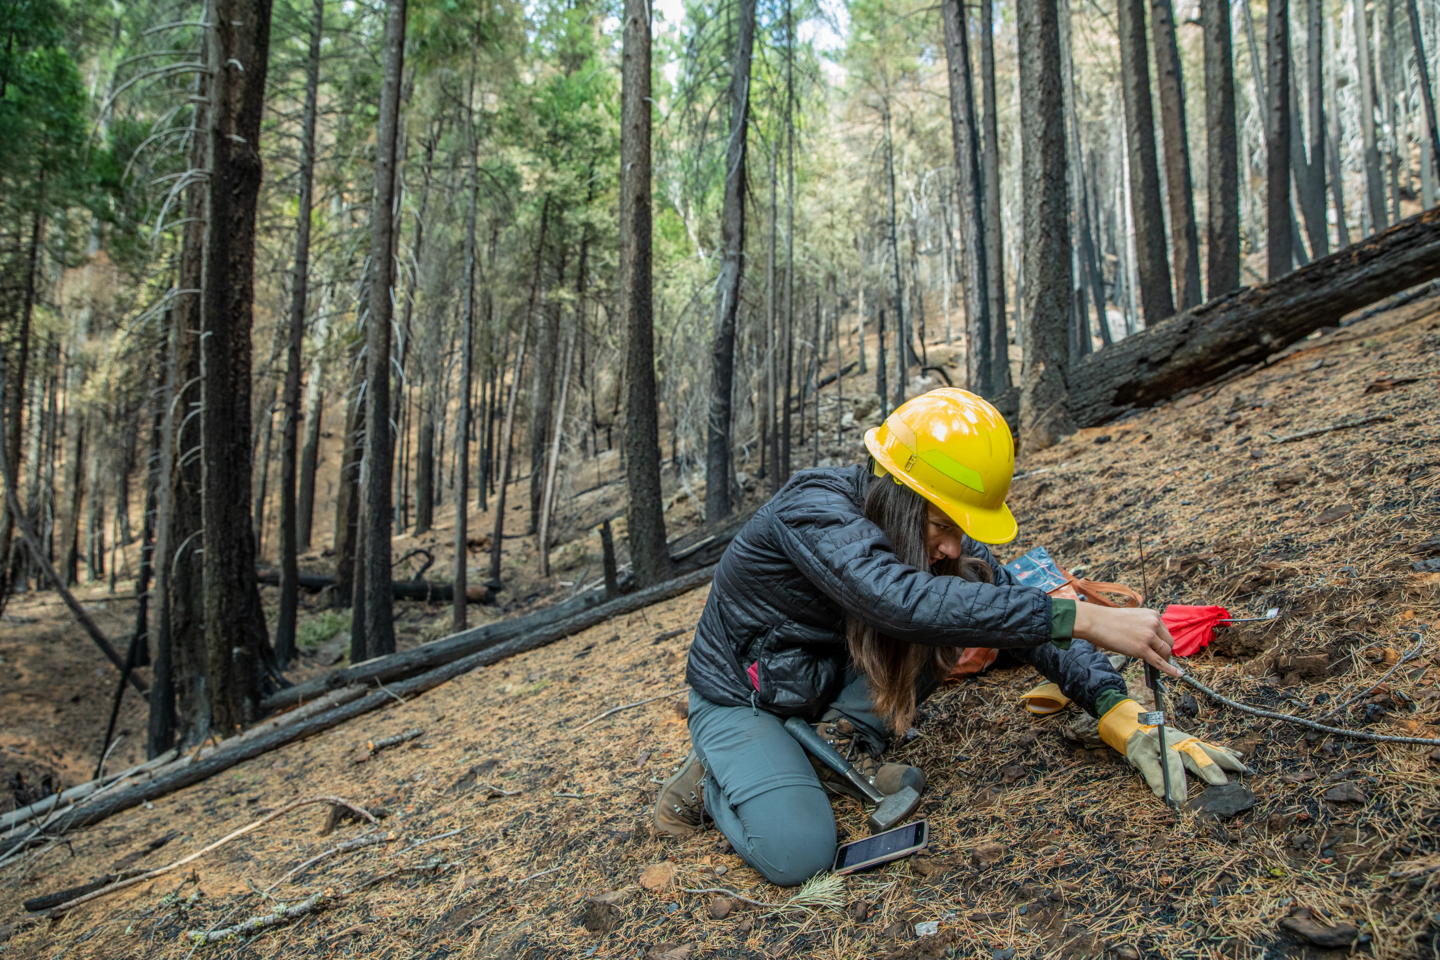 A woman in a hard hat and gloves kneels on a hillside within a recently-burned forest, inserting a probe into the soil while surrounded by blackened trees.